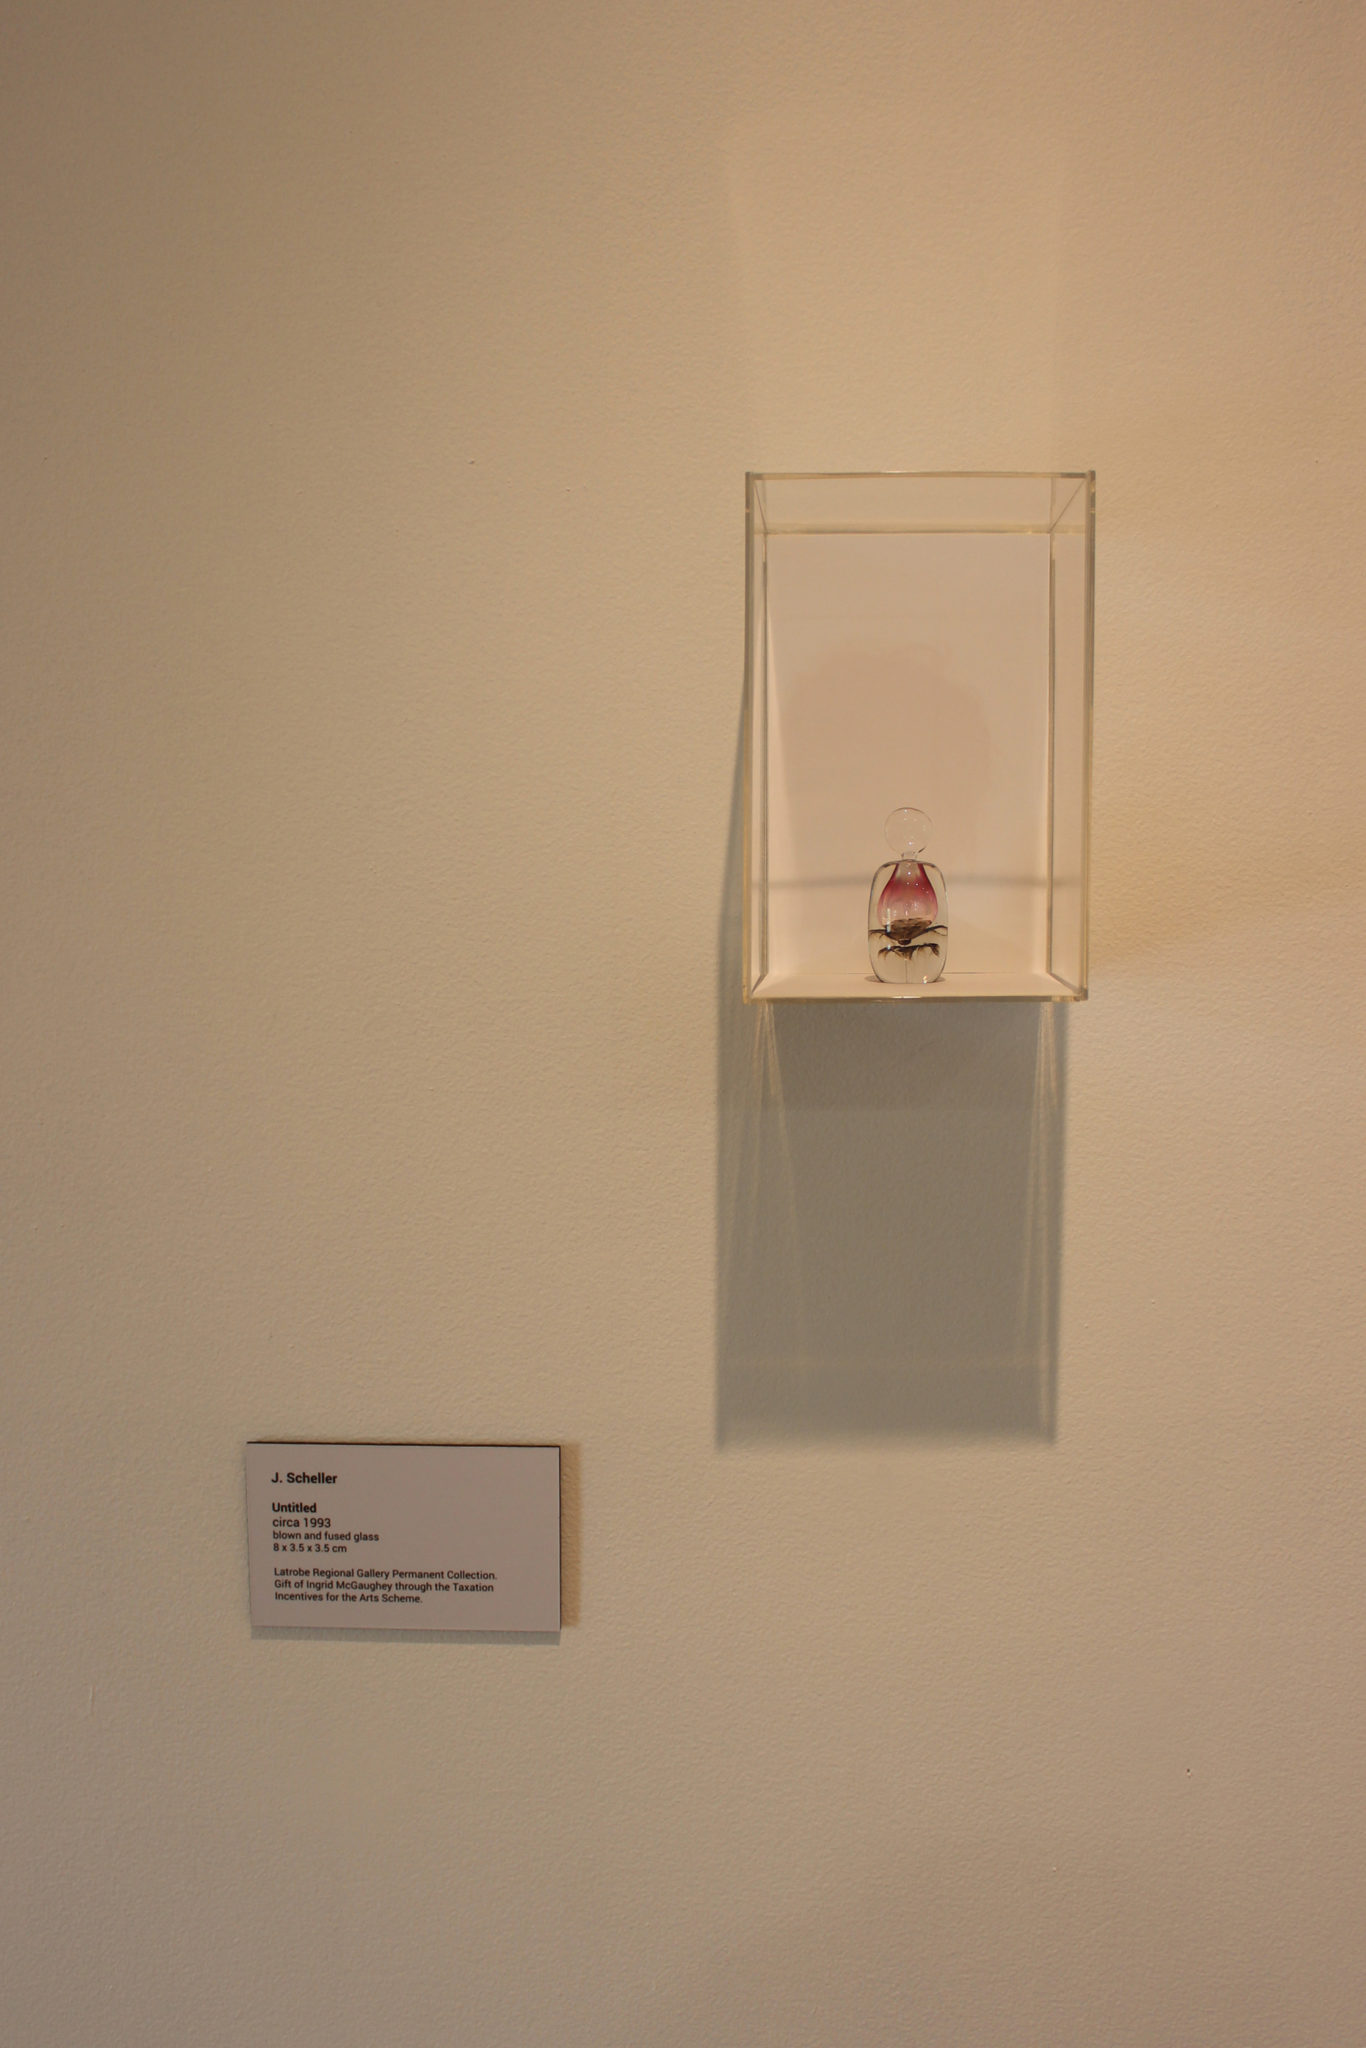 Exhibition documentation of Bloom, shown in The Lane, Latrobe Regional Gallery, 2019. Pictured: J. Scheller, Untitled, circa 1993, Blown and fused glass, 8 x 3.5 x 3.5 cm, Latrobe Regional Gallery, Ingrid McGaughey Glass Collection, donated 1996.